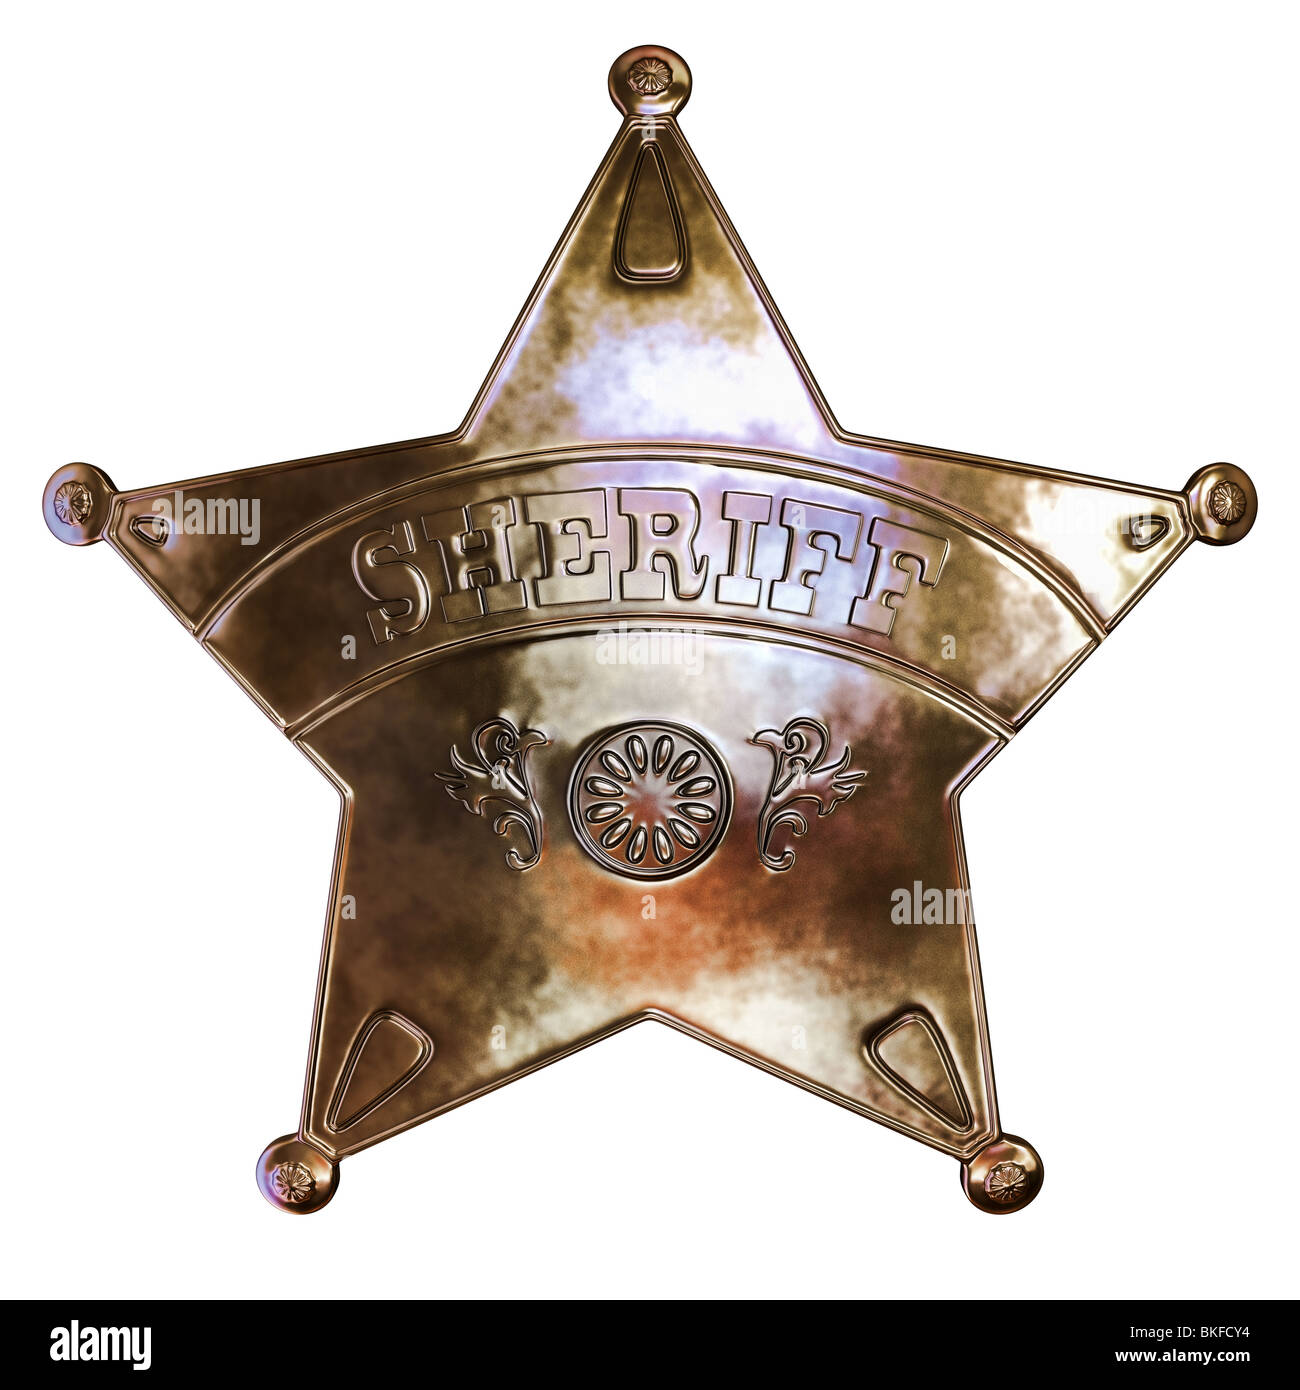 Sheriff badge - Front view Stock Photo